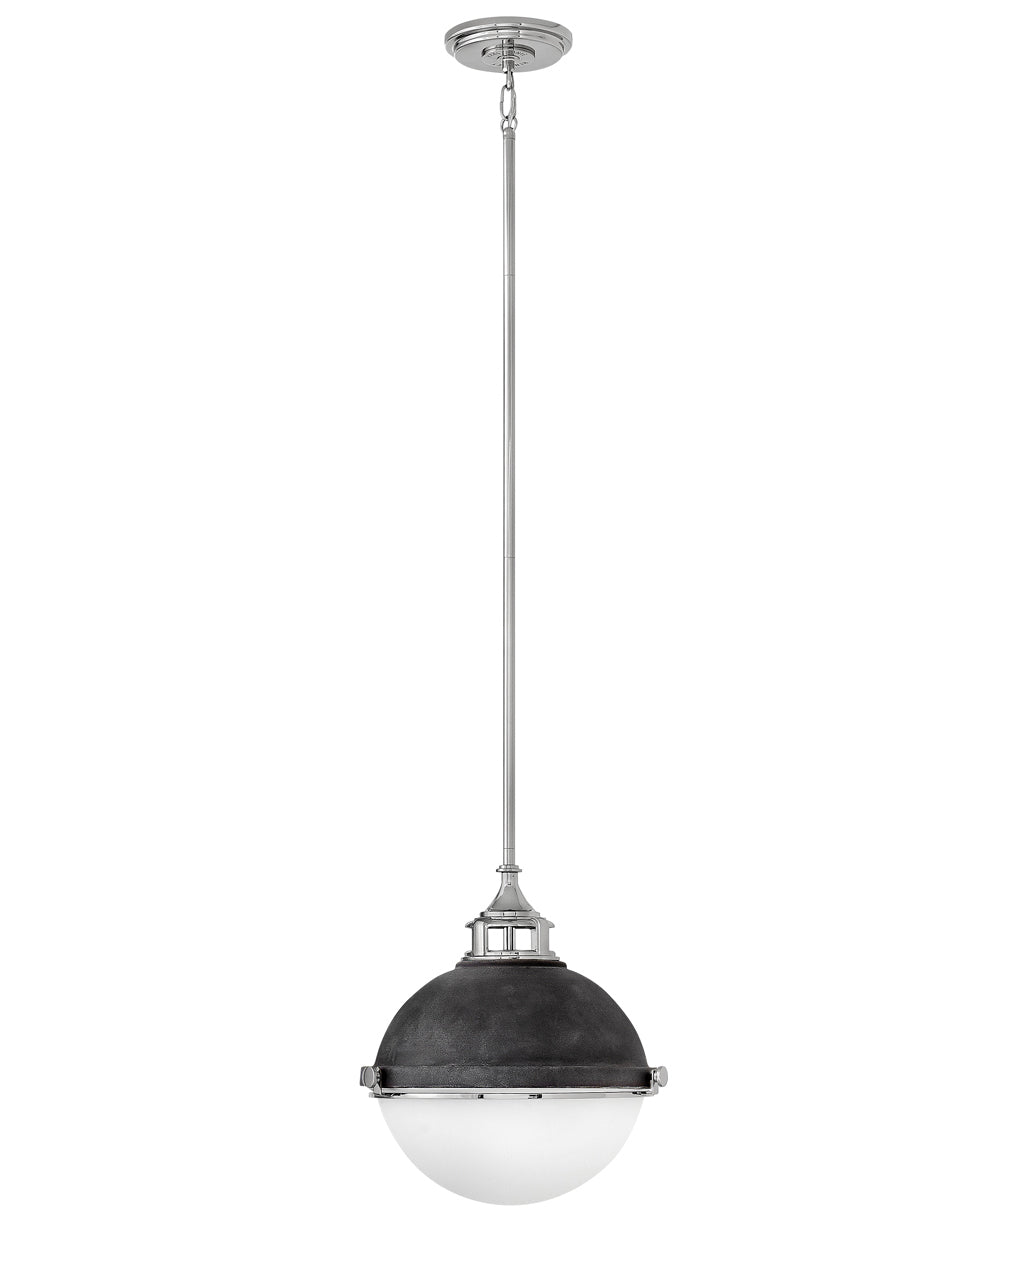 Hinkley Fletcher Pendant Pendant Hinkley Aged Zinc with Polished Nickel accent 13.5x13.5x14.5 